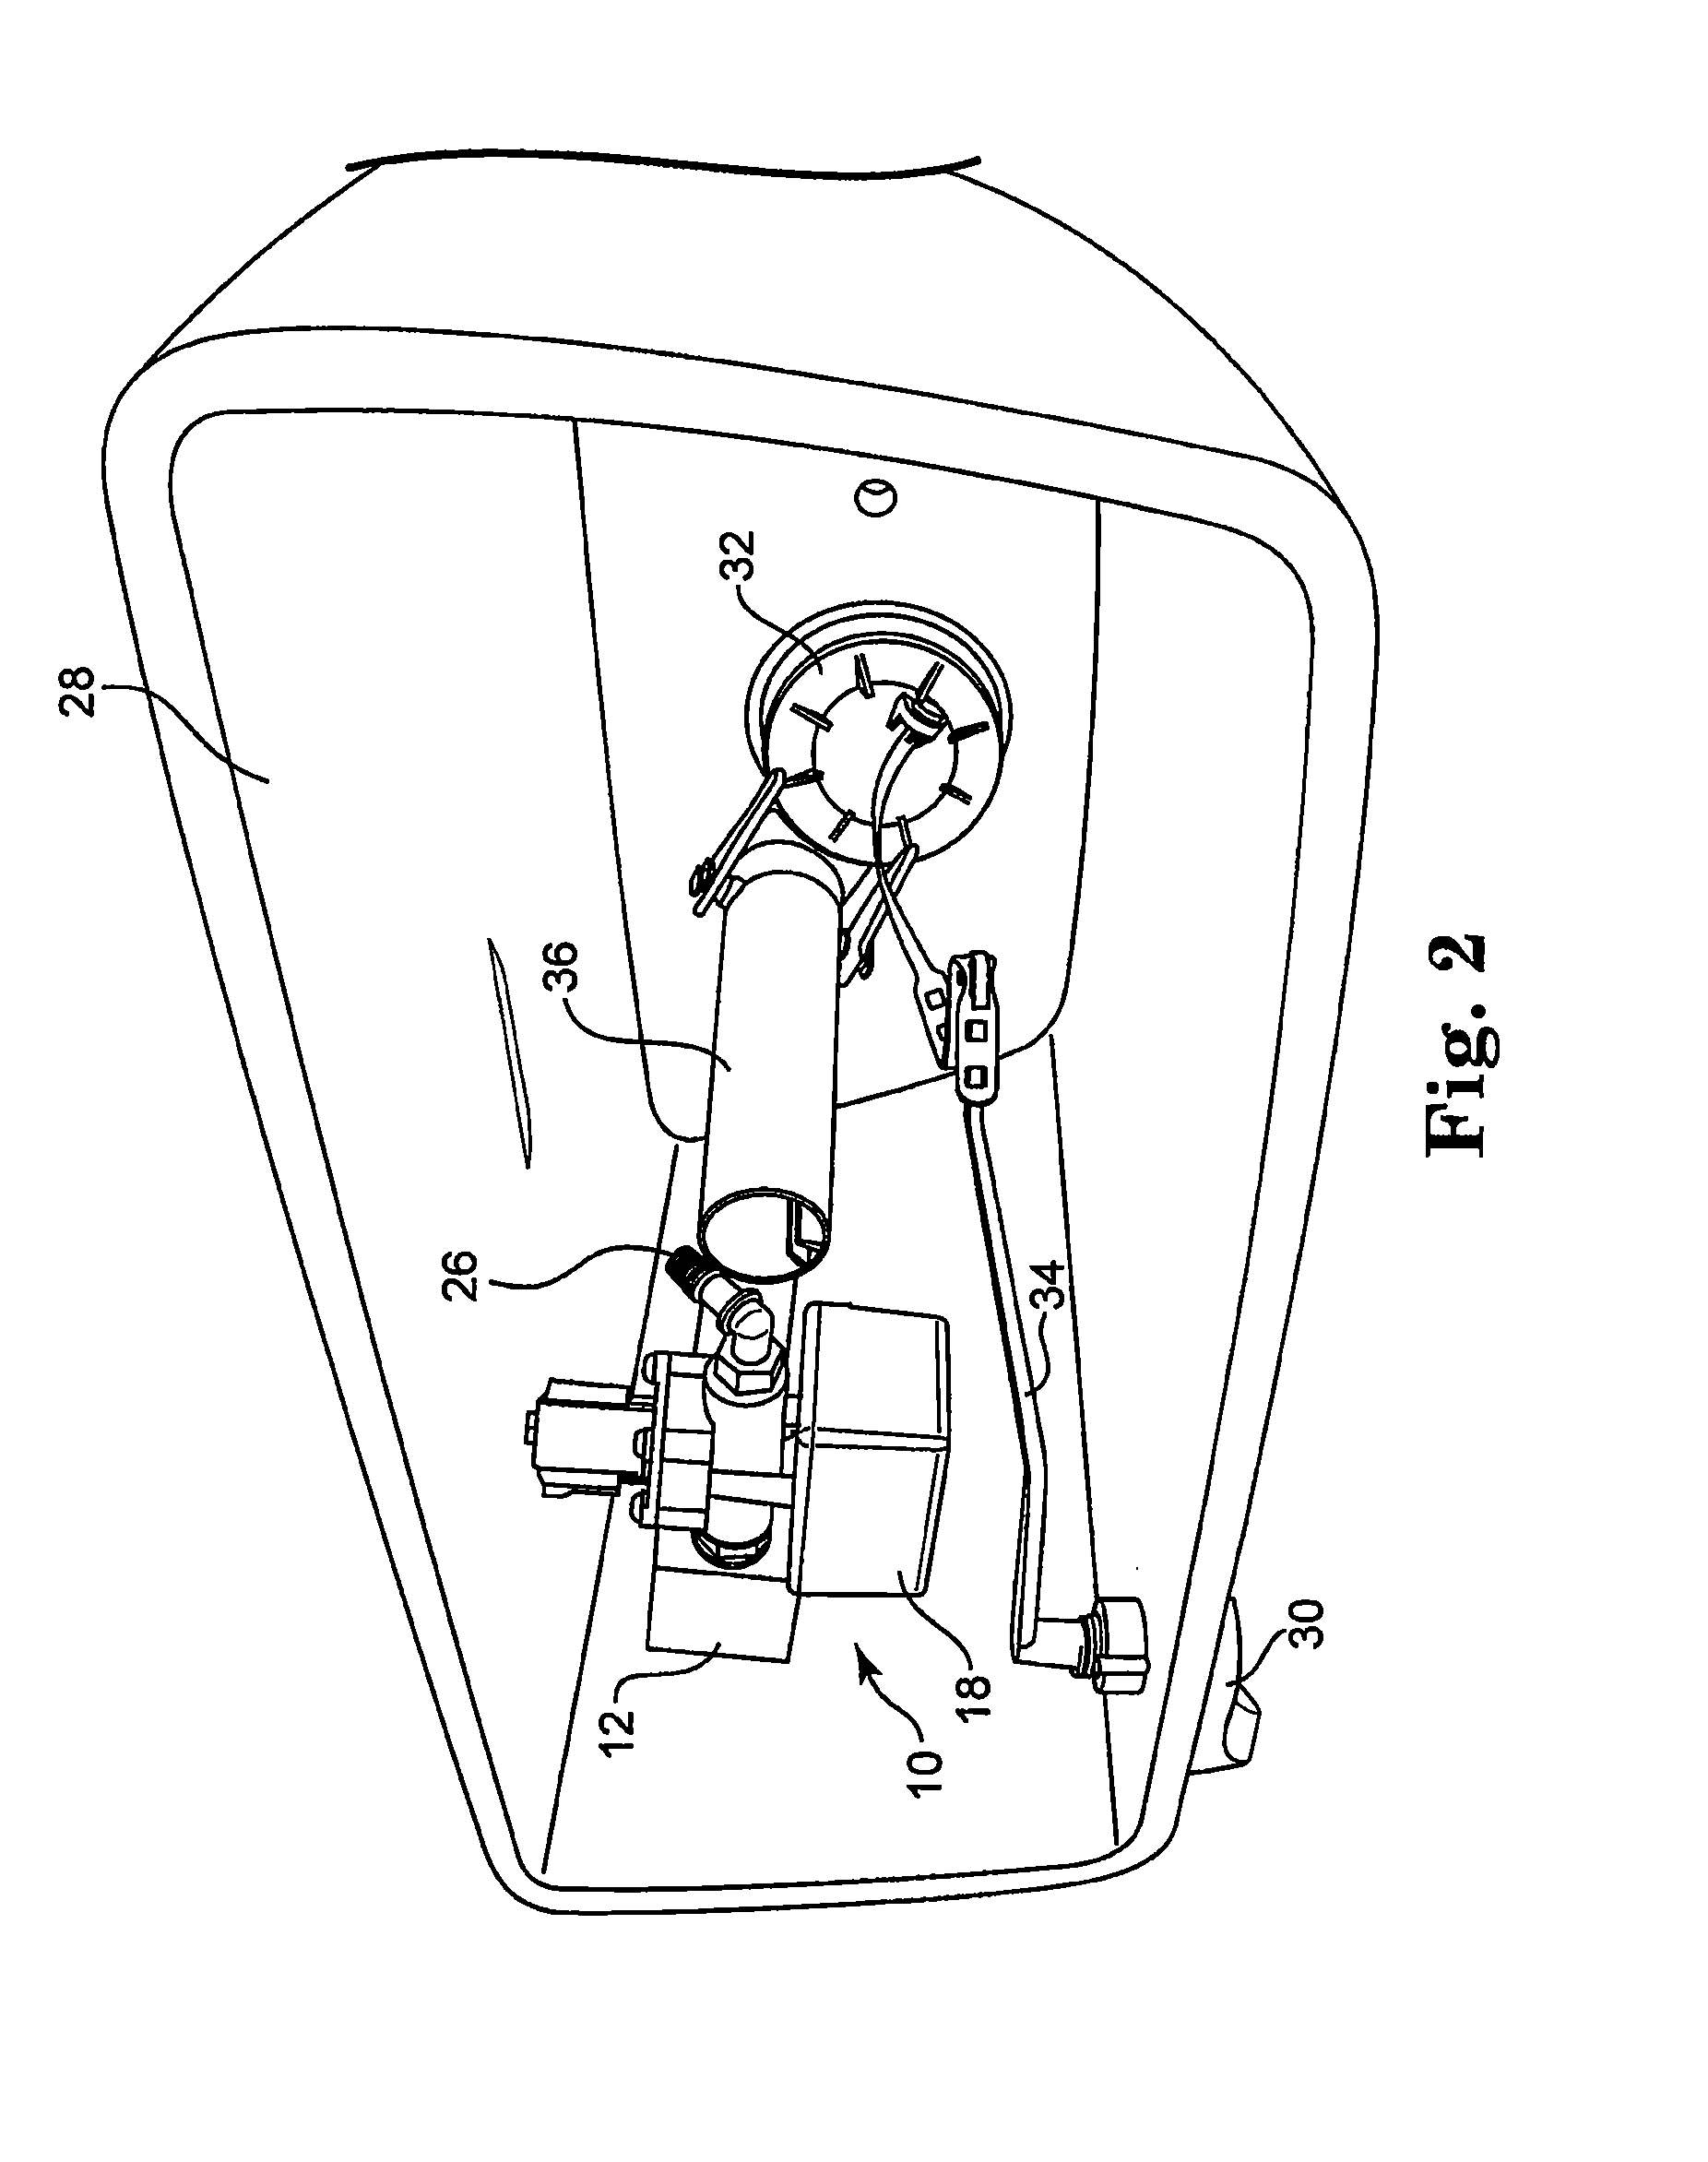 Electronic toilet tank monitor utilizing a bistable latching solenoid control circuit